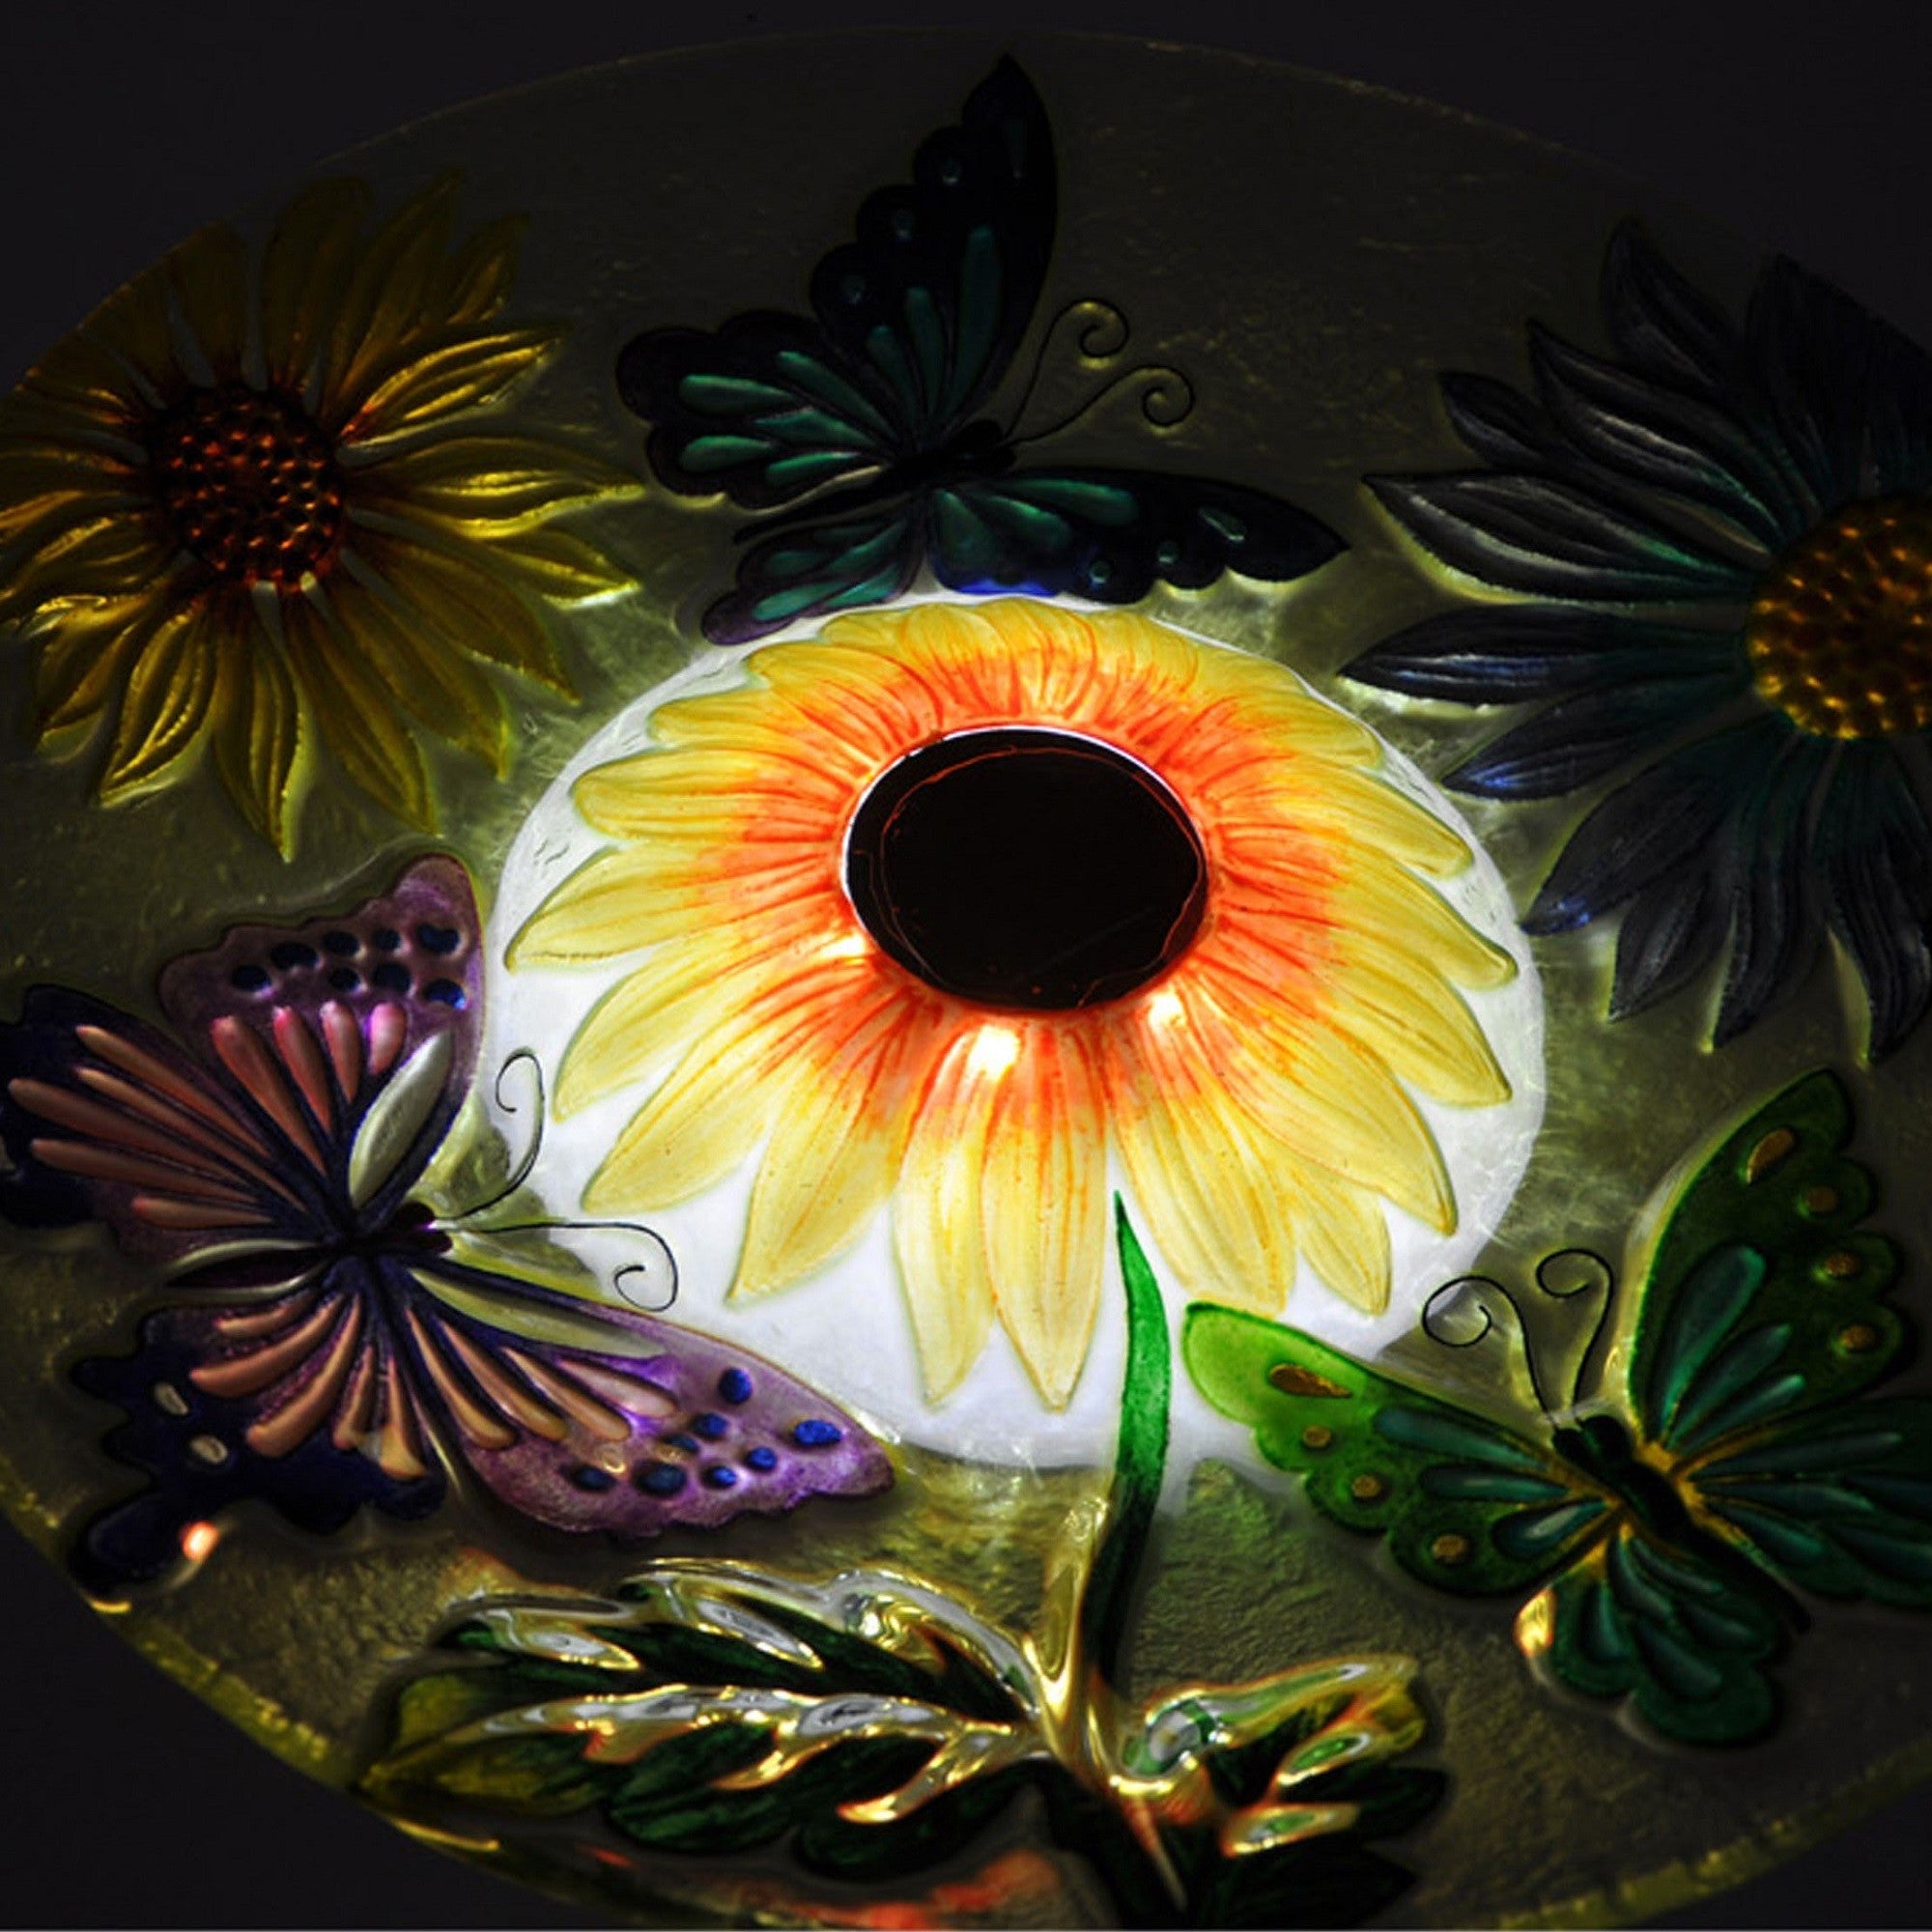 Teamson Home - Outdoor 18 Inch Handpainted Butterfly Fusion Glass Solar Bird Bath w/ Stand